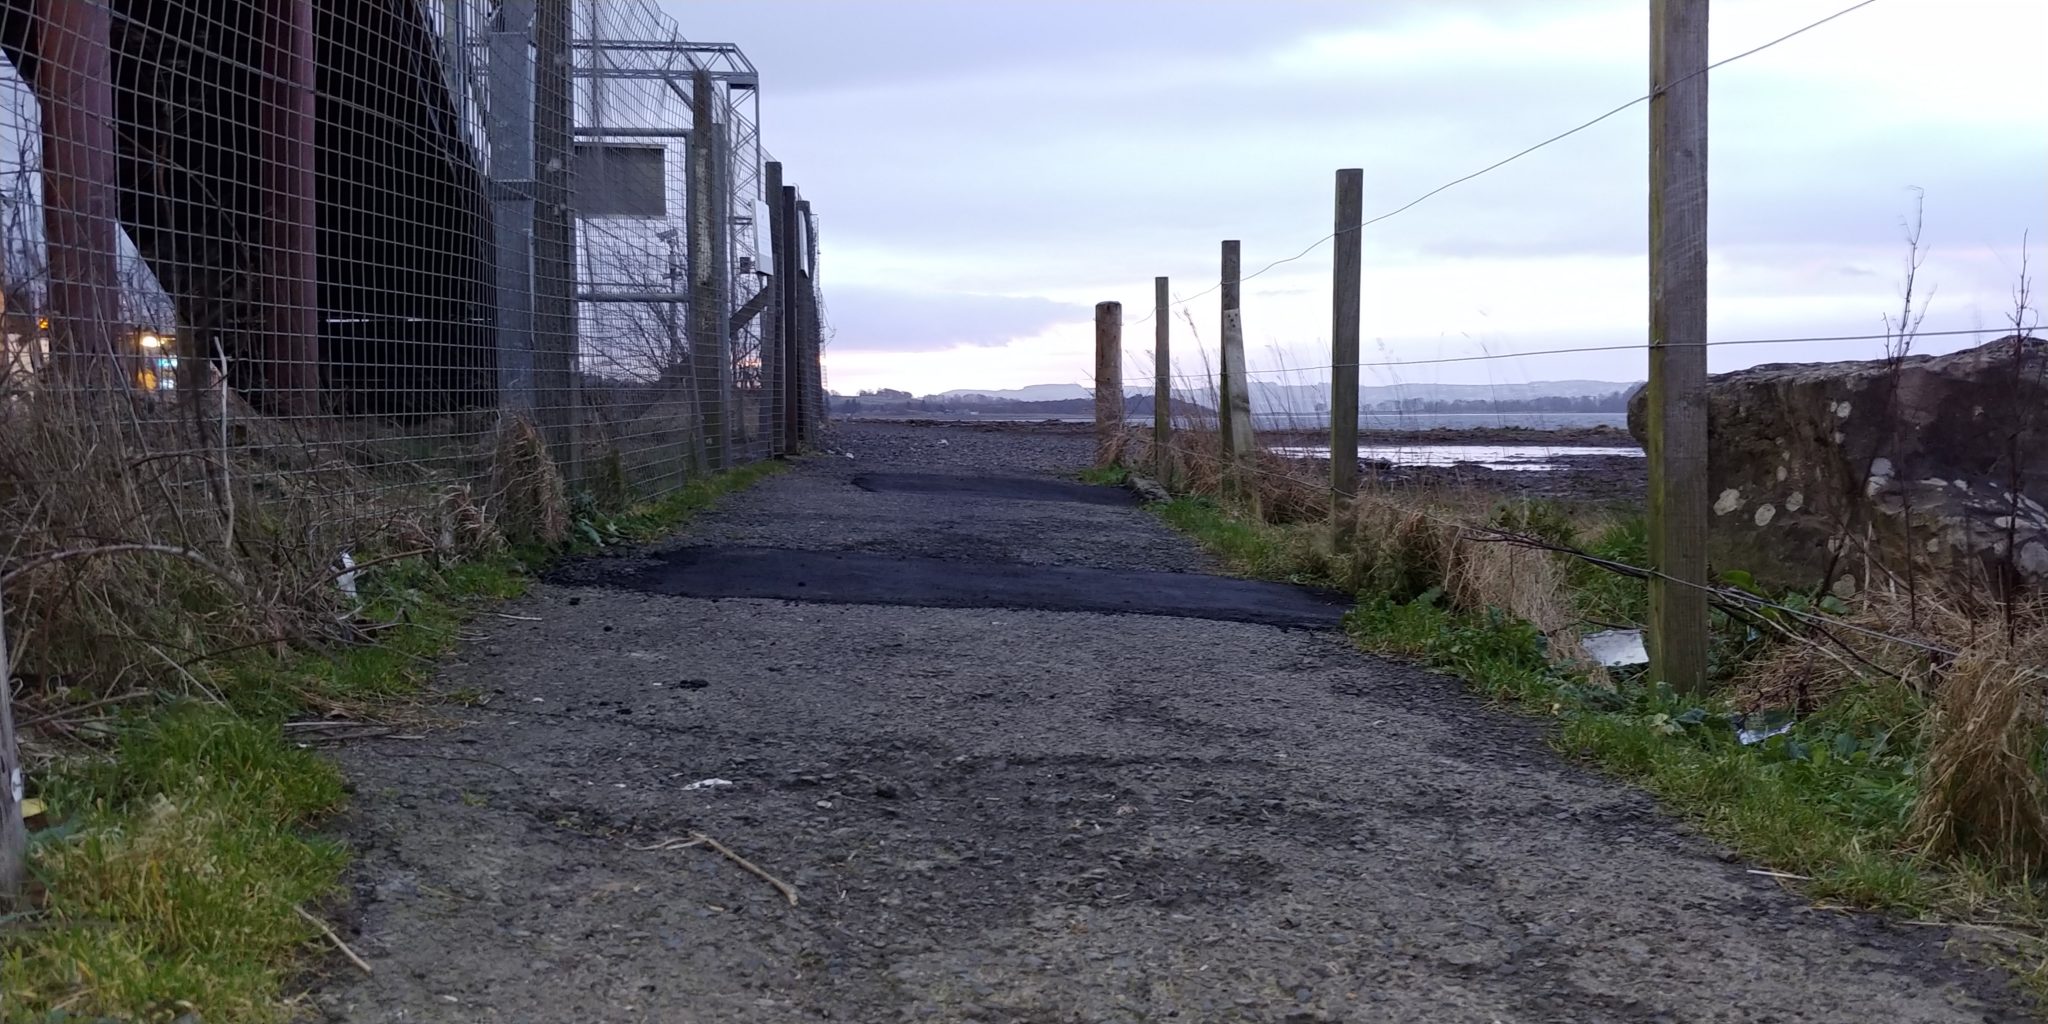 The pavement by the station entrance at Craigendoran